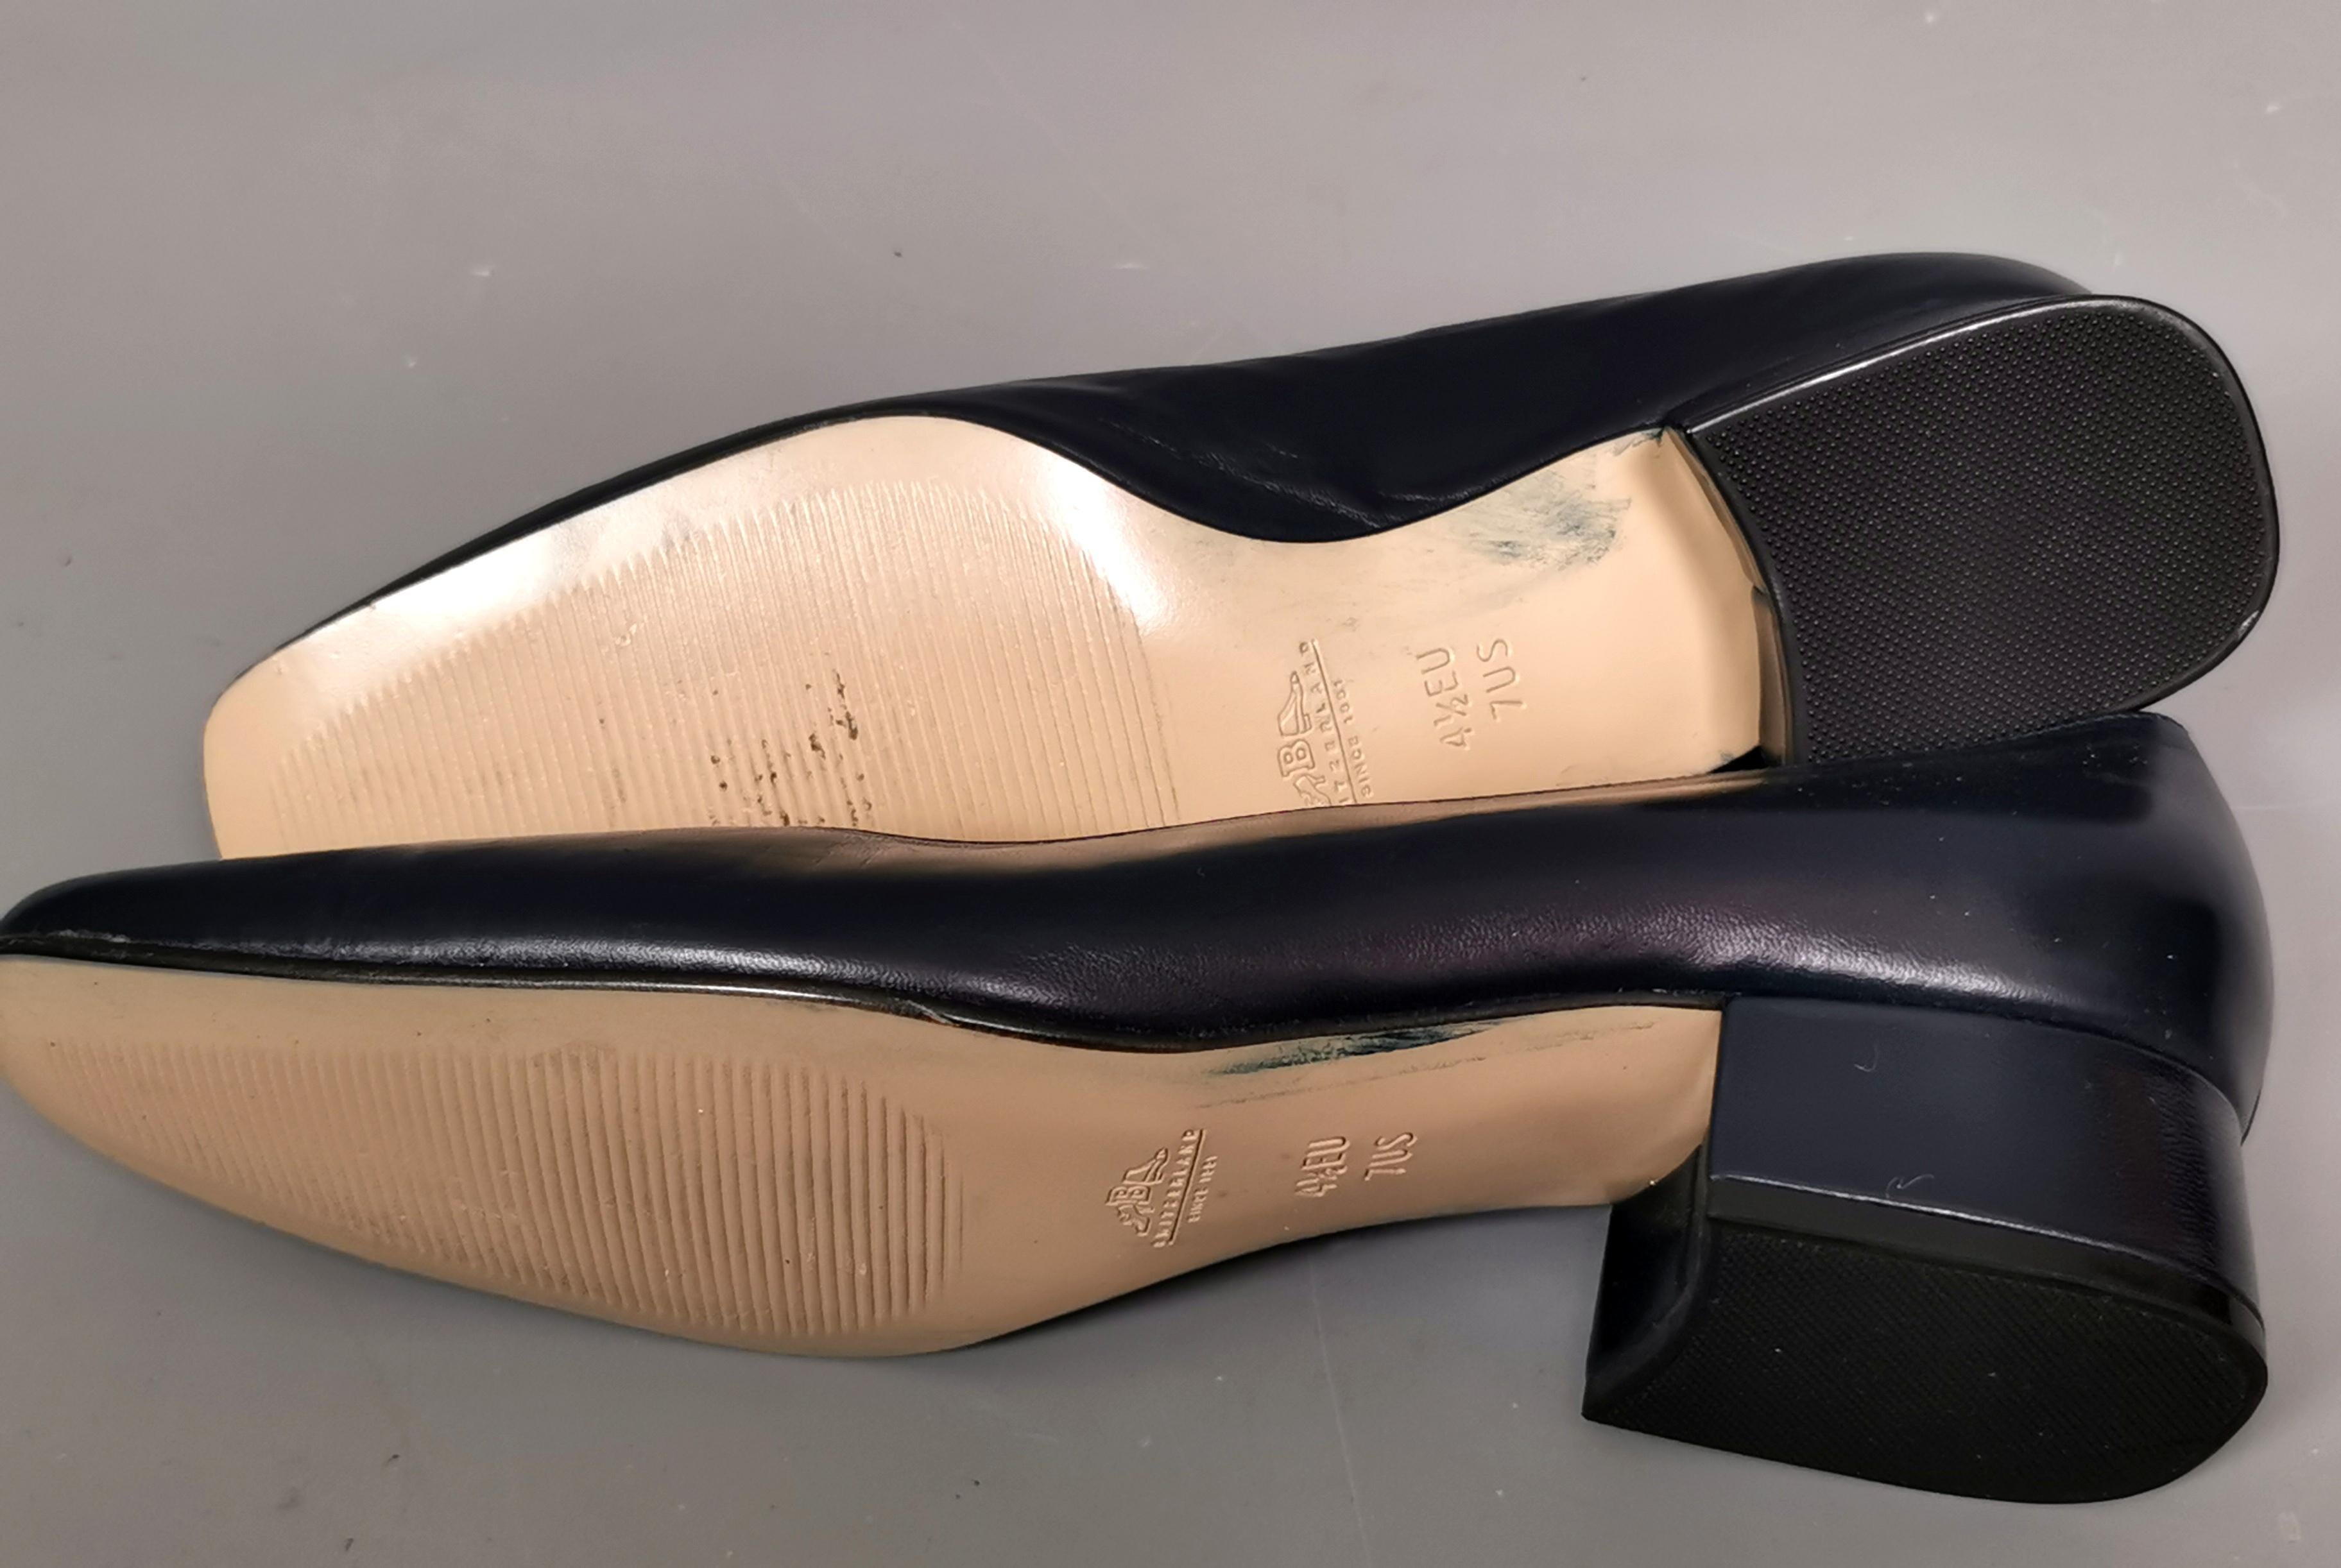 Vintage ladies navy leather court shoes, pumps, Bally  3